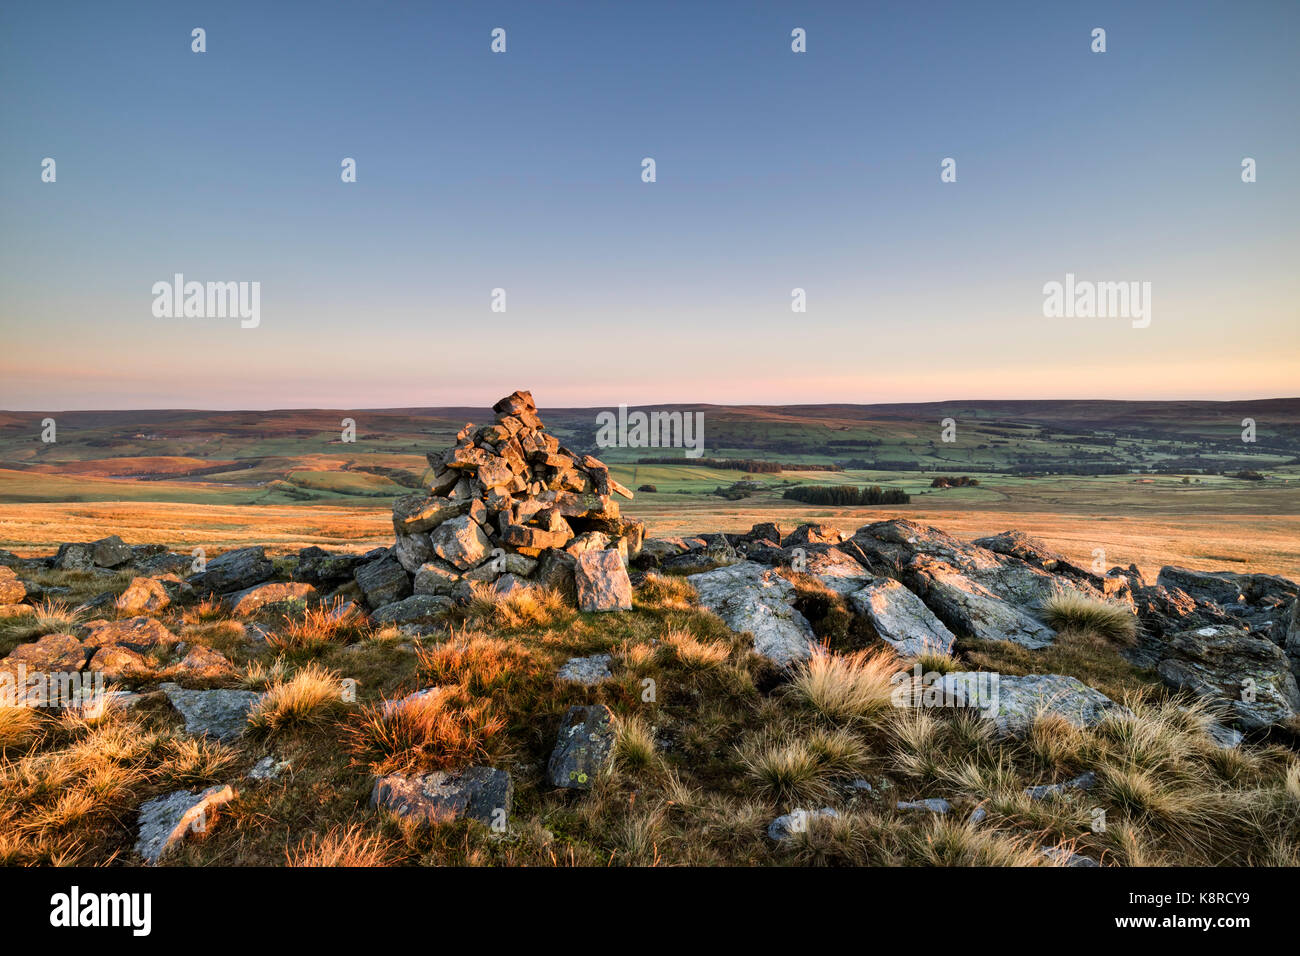 Early Morning Light Illuminating the Cairn on the Eastern End of Carrs Top (Bollihope Carrs), Weardale, County Durham, UK Stock Photo